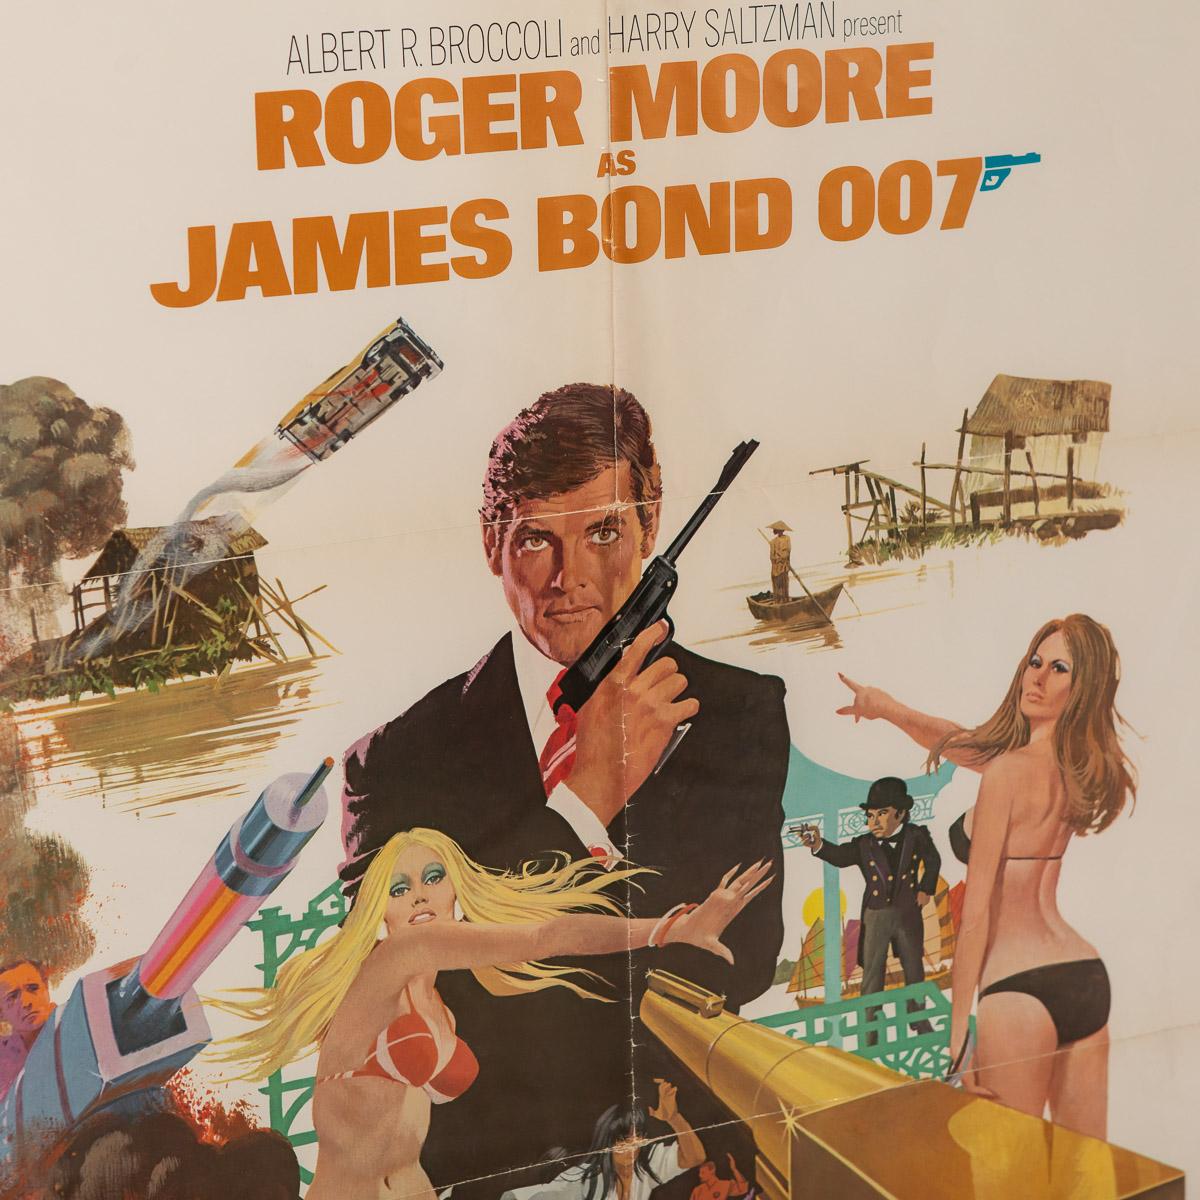 A very rare and original Argentinian release poster from the 1974 'Man With The Golden Gun'. This was the ninth film in the series produced by Eon Productions. It was the second time that Roger Moore played James Bond, and the fourth and final time